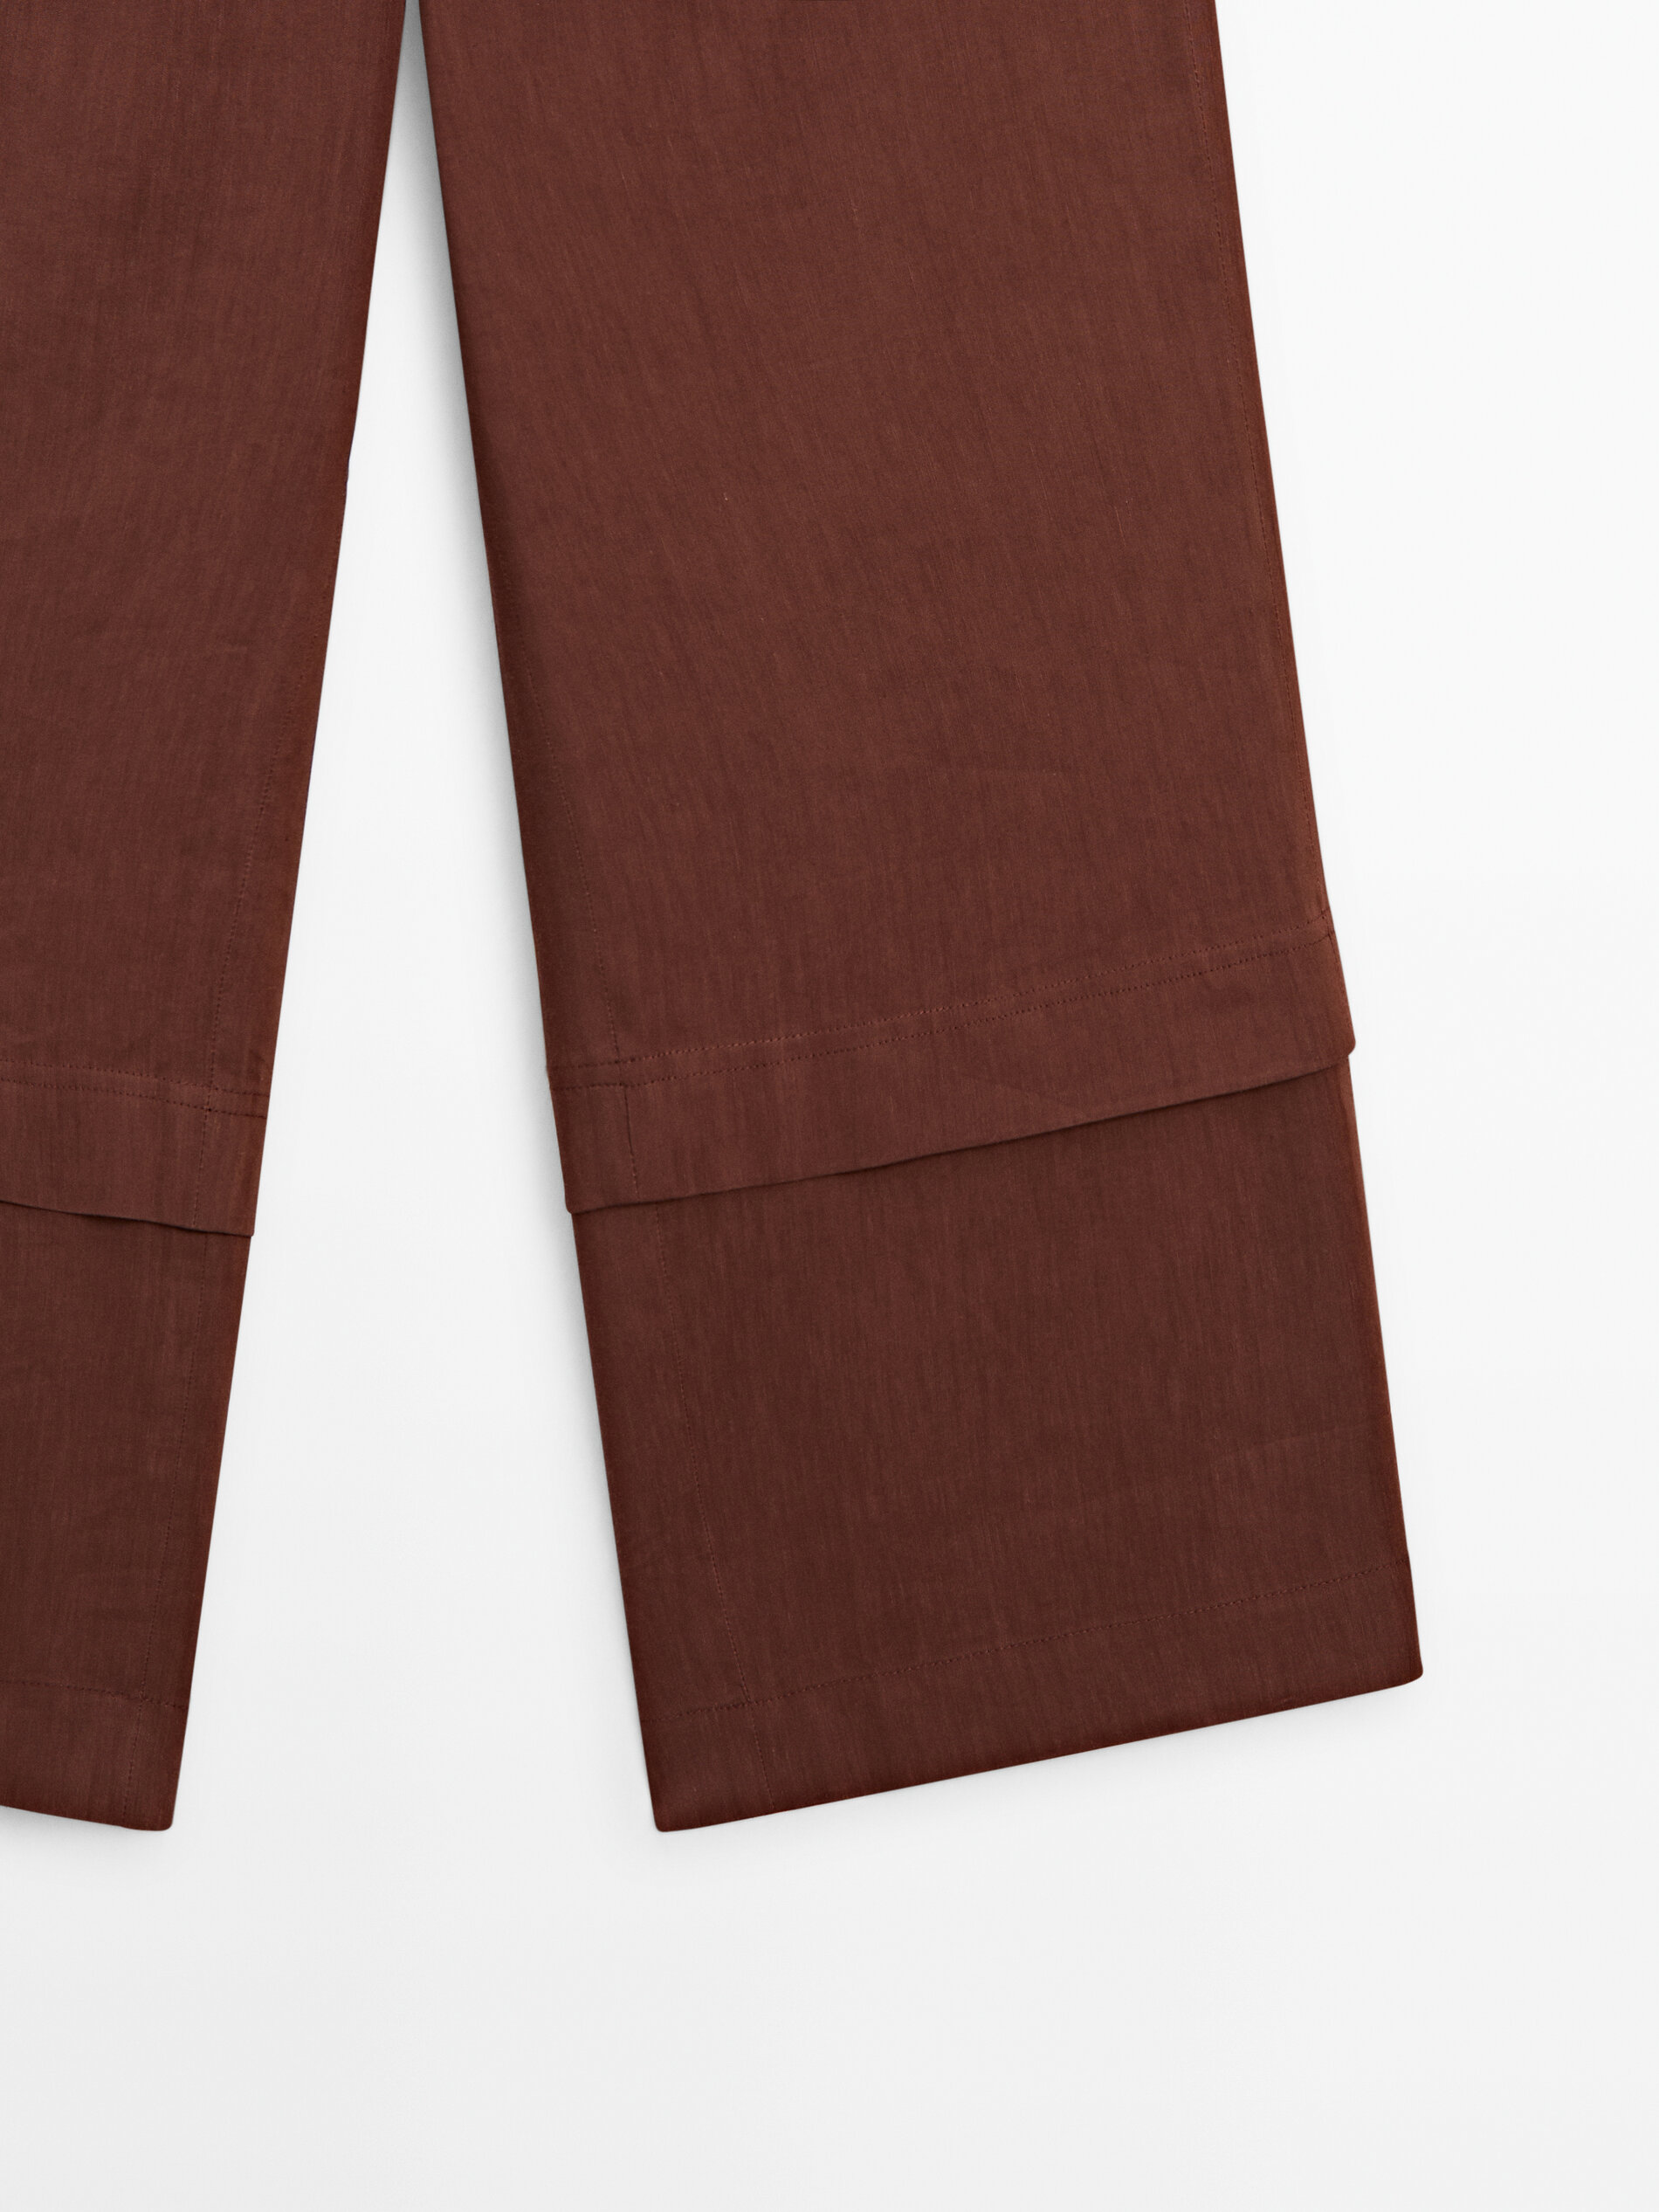 Choosing a Size and Grading for our Mitchell Trousers | Closet Core Patterns